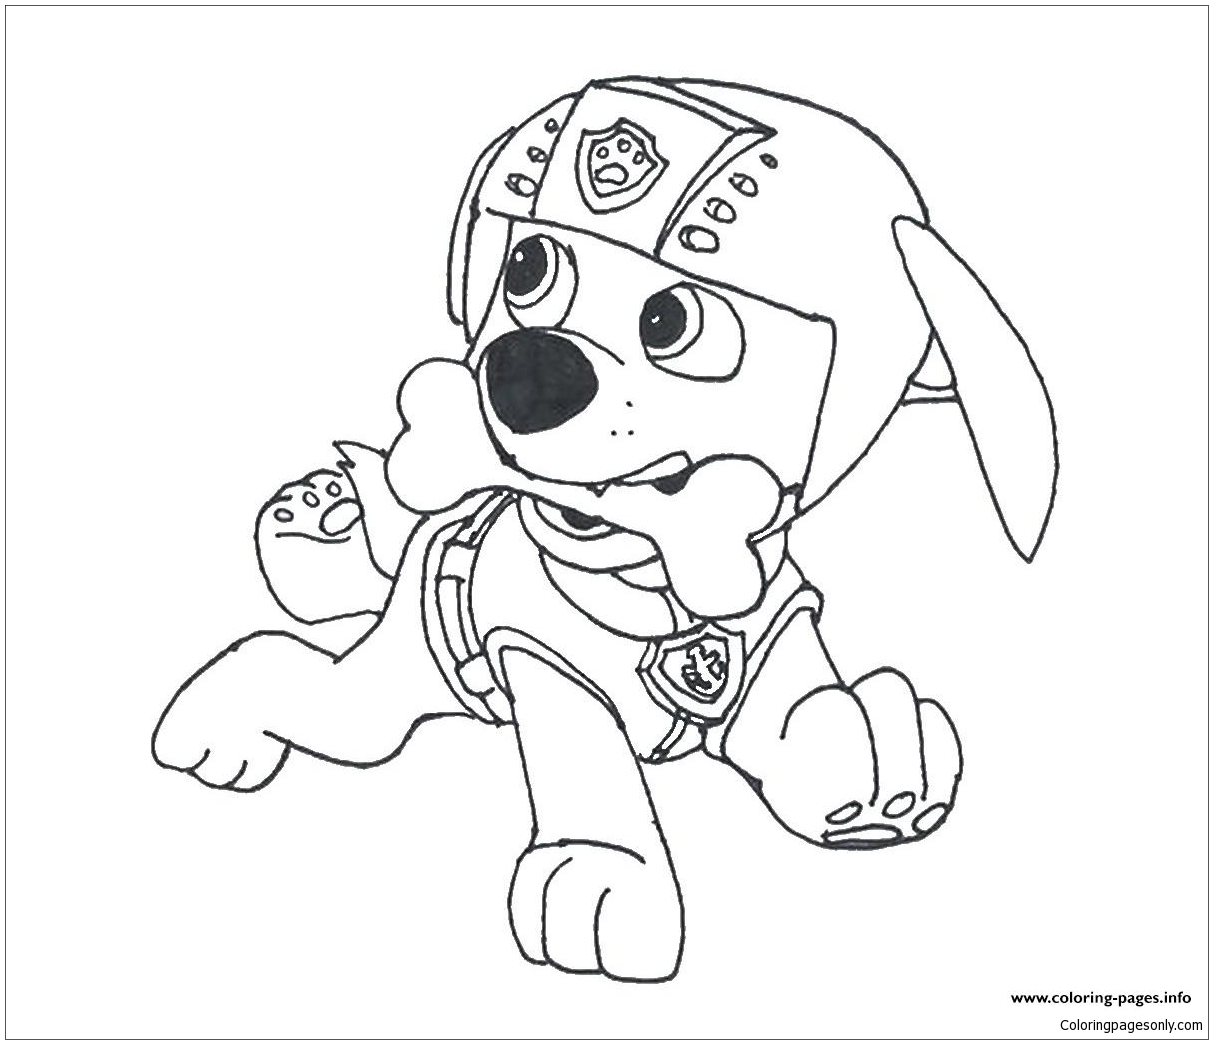 Paw Patrol Zuma With A Bone Coloring Pages - Cartoons Coloring Pages - Coloring  Pages For Kids And Adults